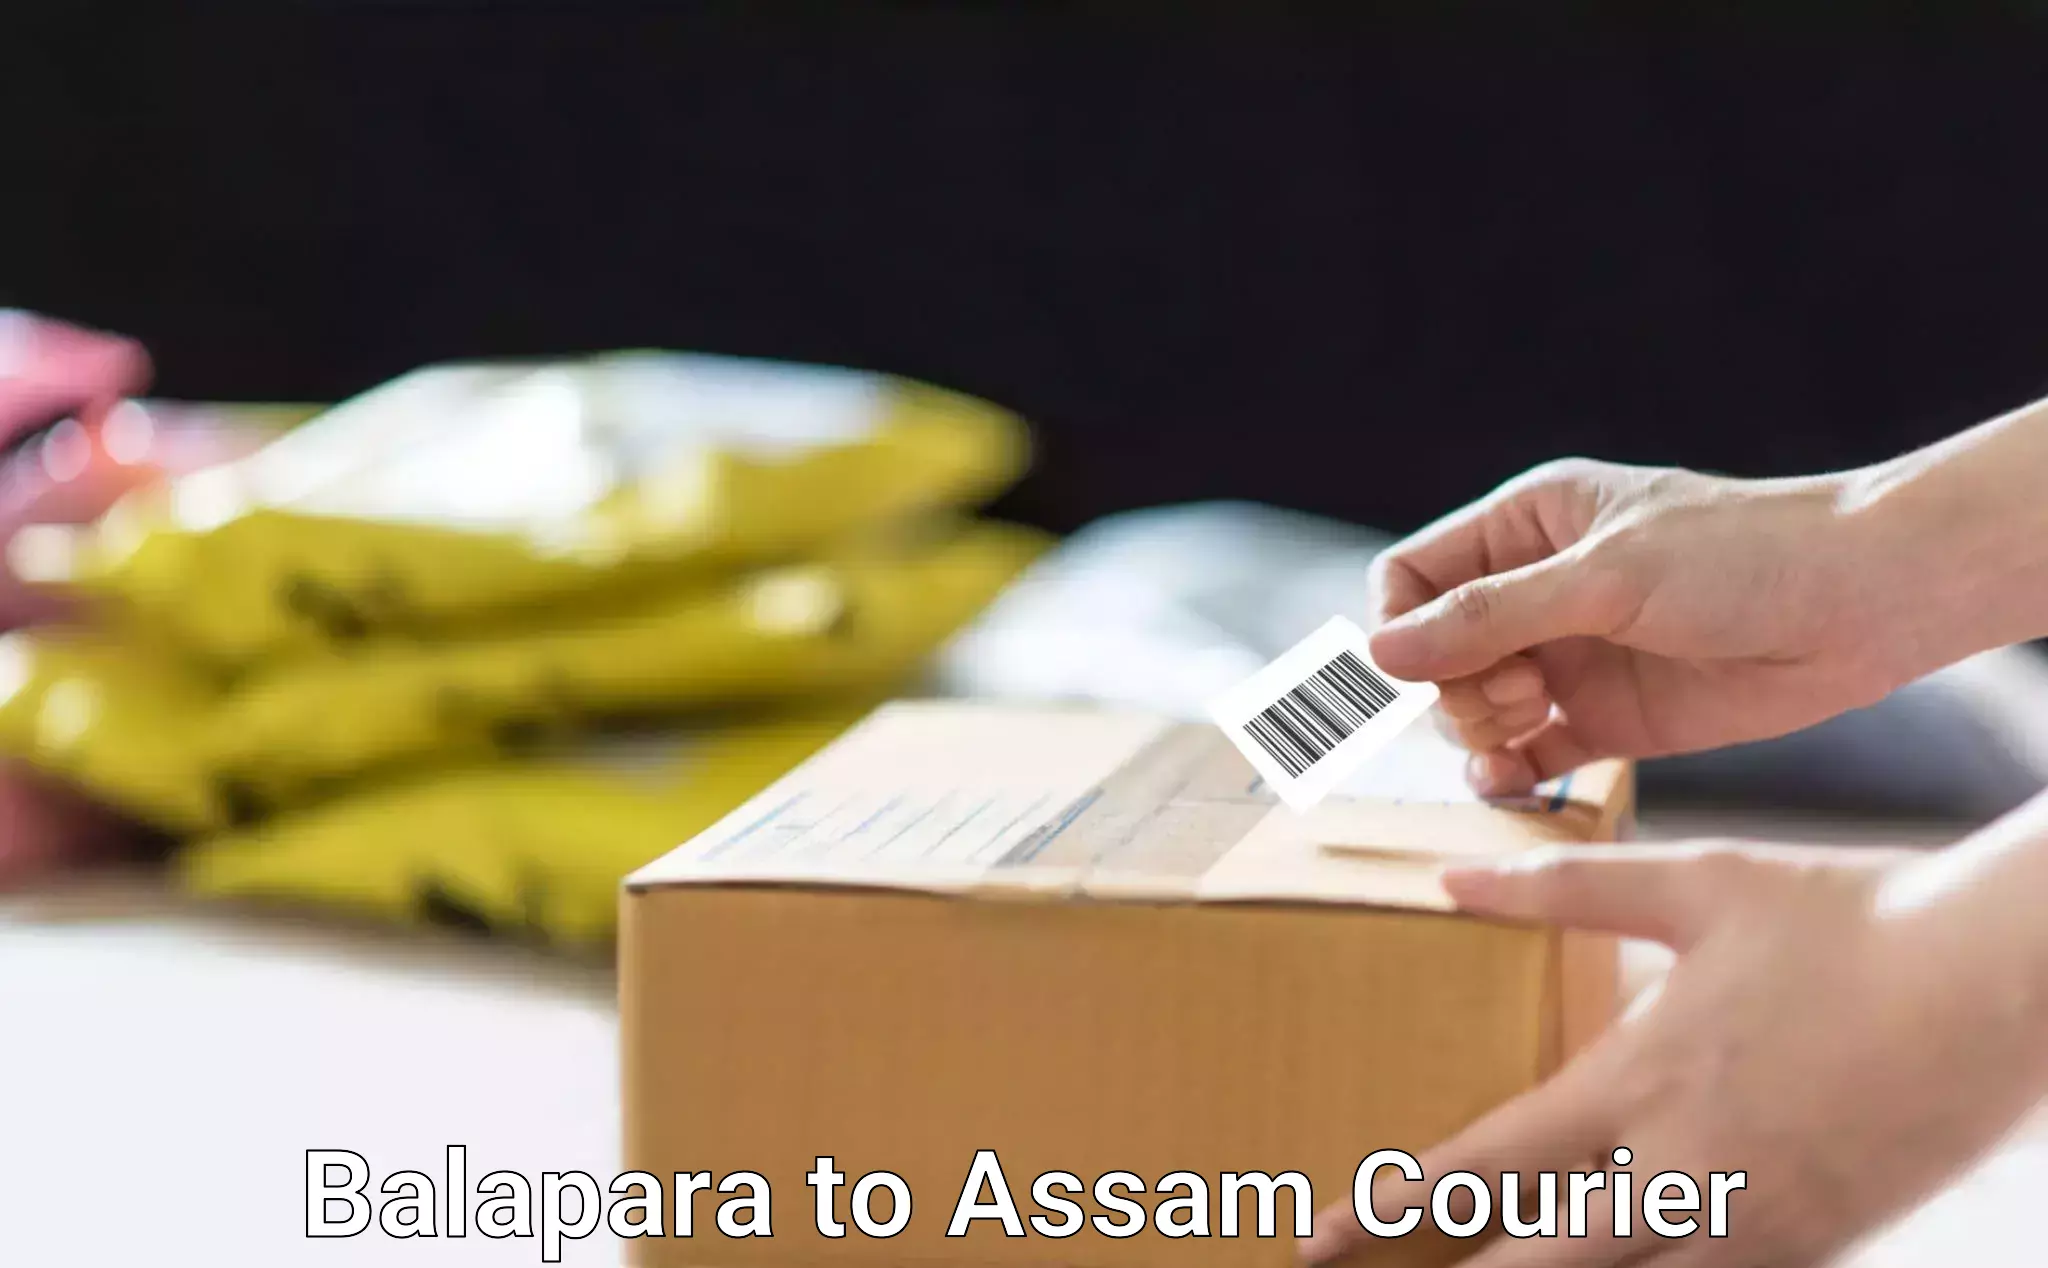 Scalable shipping solutions Balapara to Lala Assam